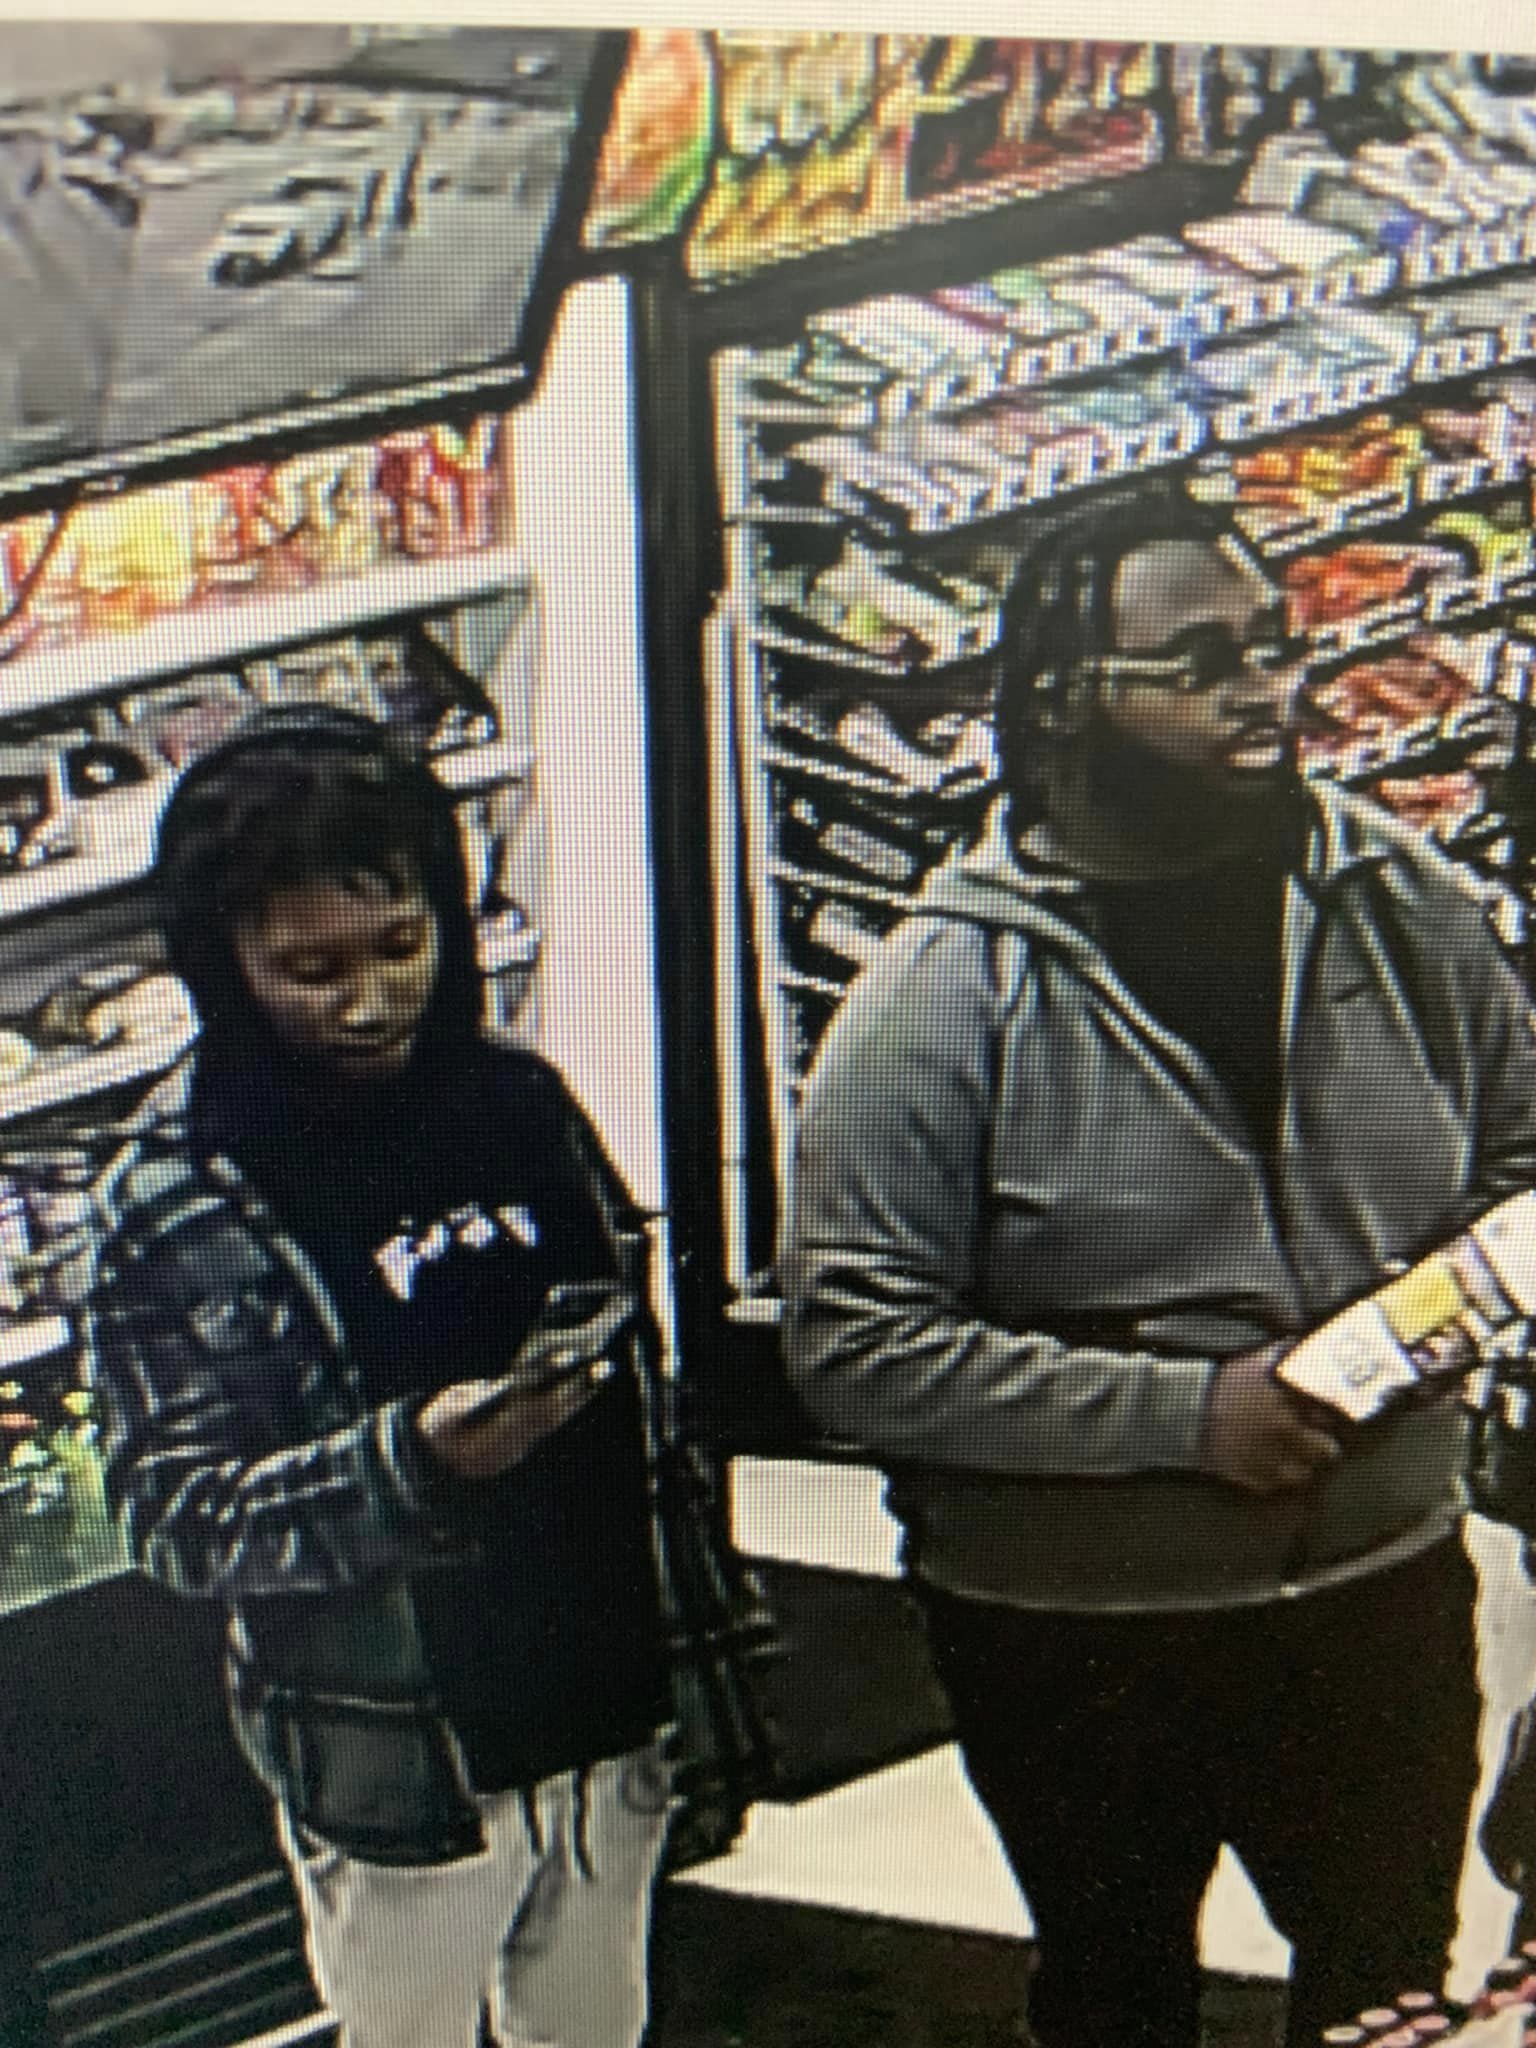 Suspects tried to spend thousands of dollars on scratch-off tickets with possibly stolen credit card numbers